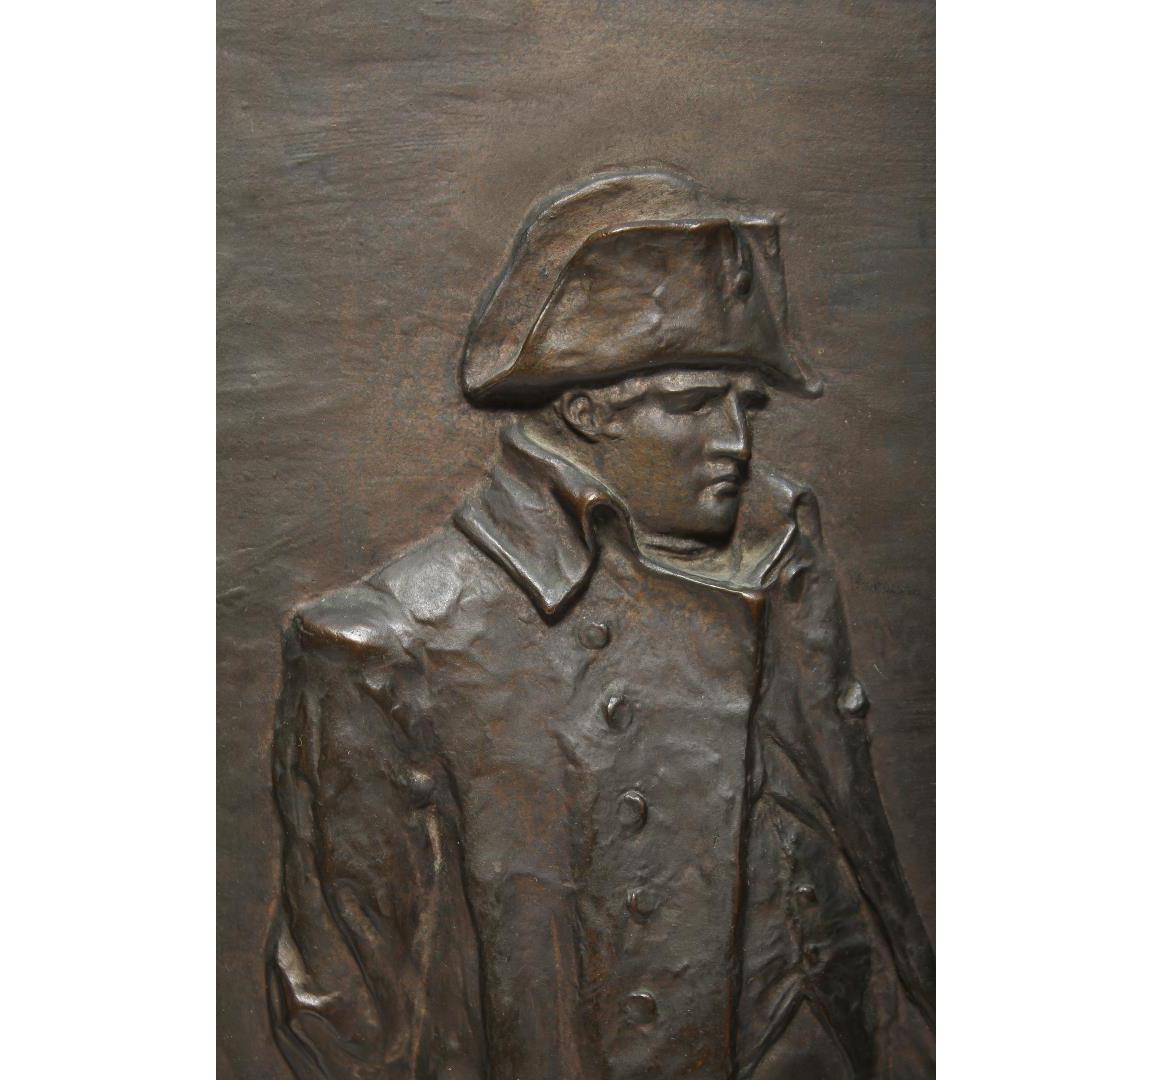 Neoclassical style bronze plaque depicting Napoleon Bonaparte, made by J. Lisney Banks (Canadian 1850-1934). The piece is mounted on a green marble slab and is marked and dated 1895 - the lower right corner is incised 